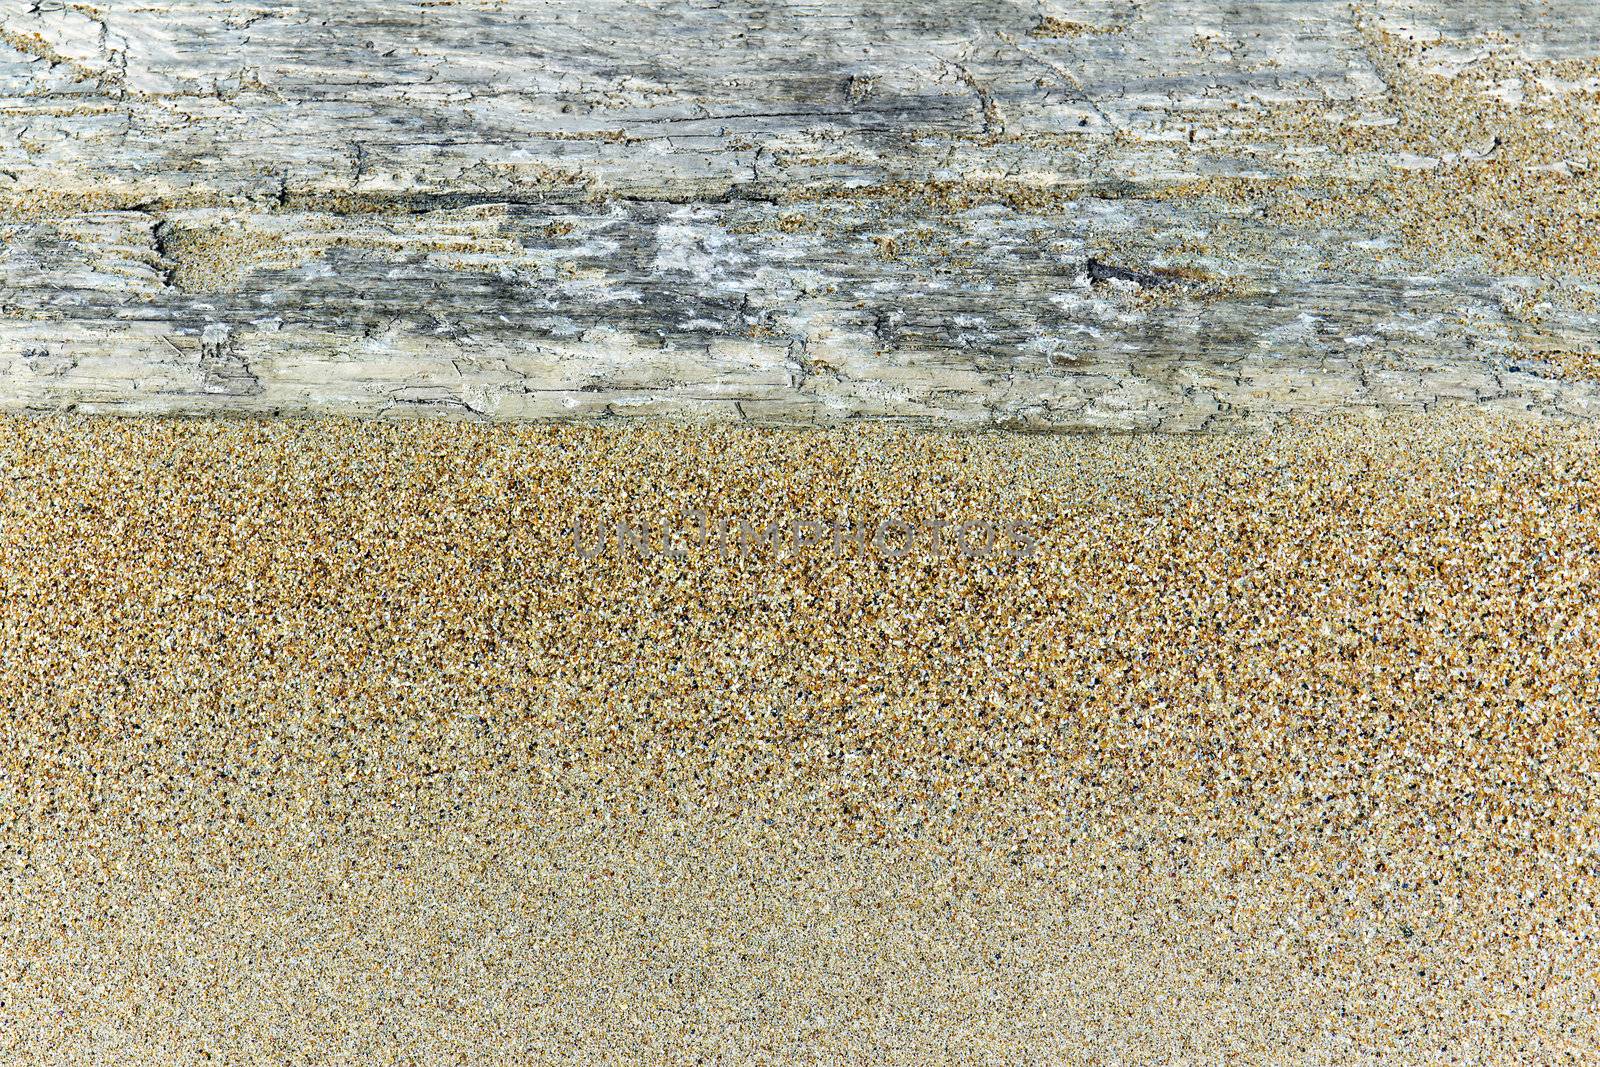 an old wooden board in the sand as the background